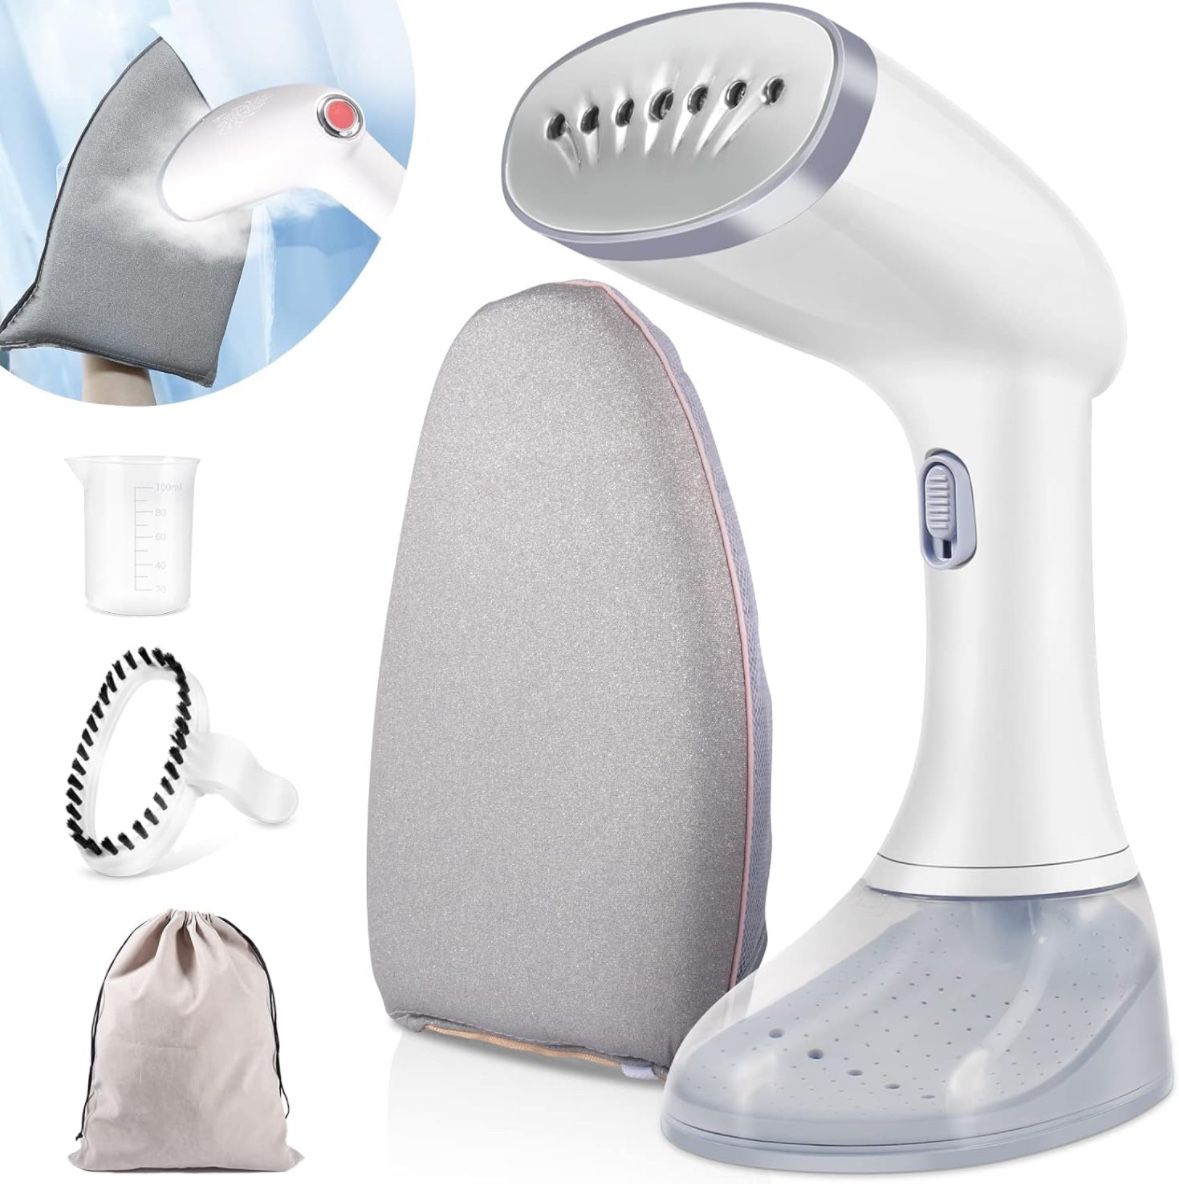 New Handheld Garment Steamer Set with Mini Ironing Board & Travel Case